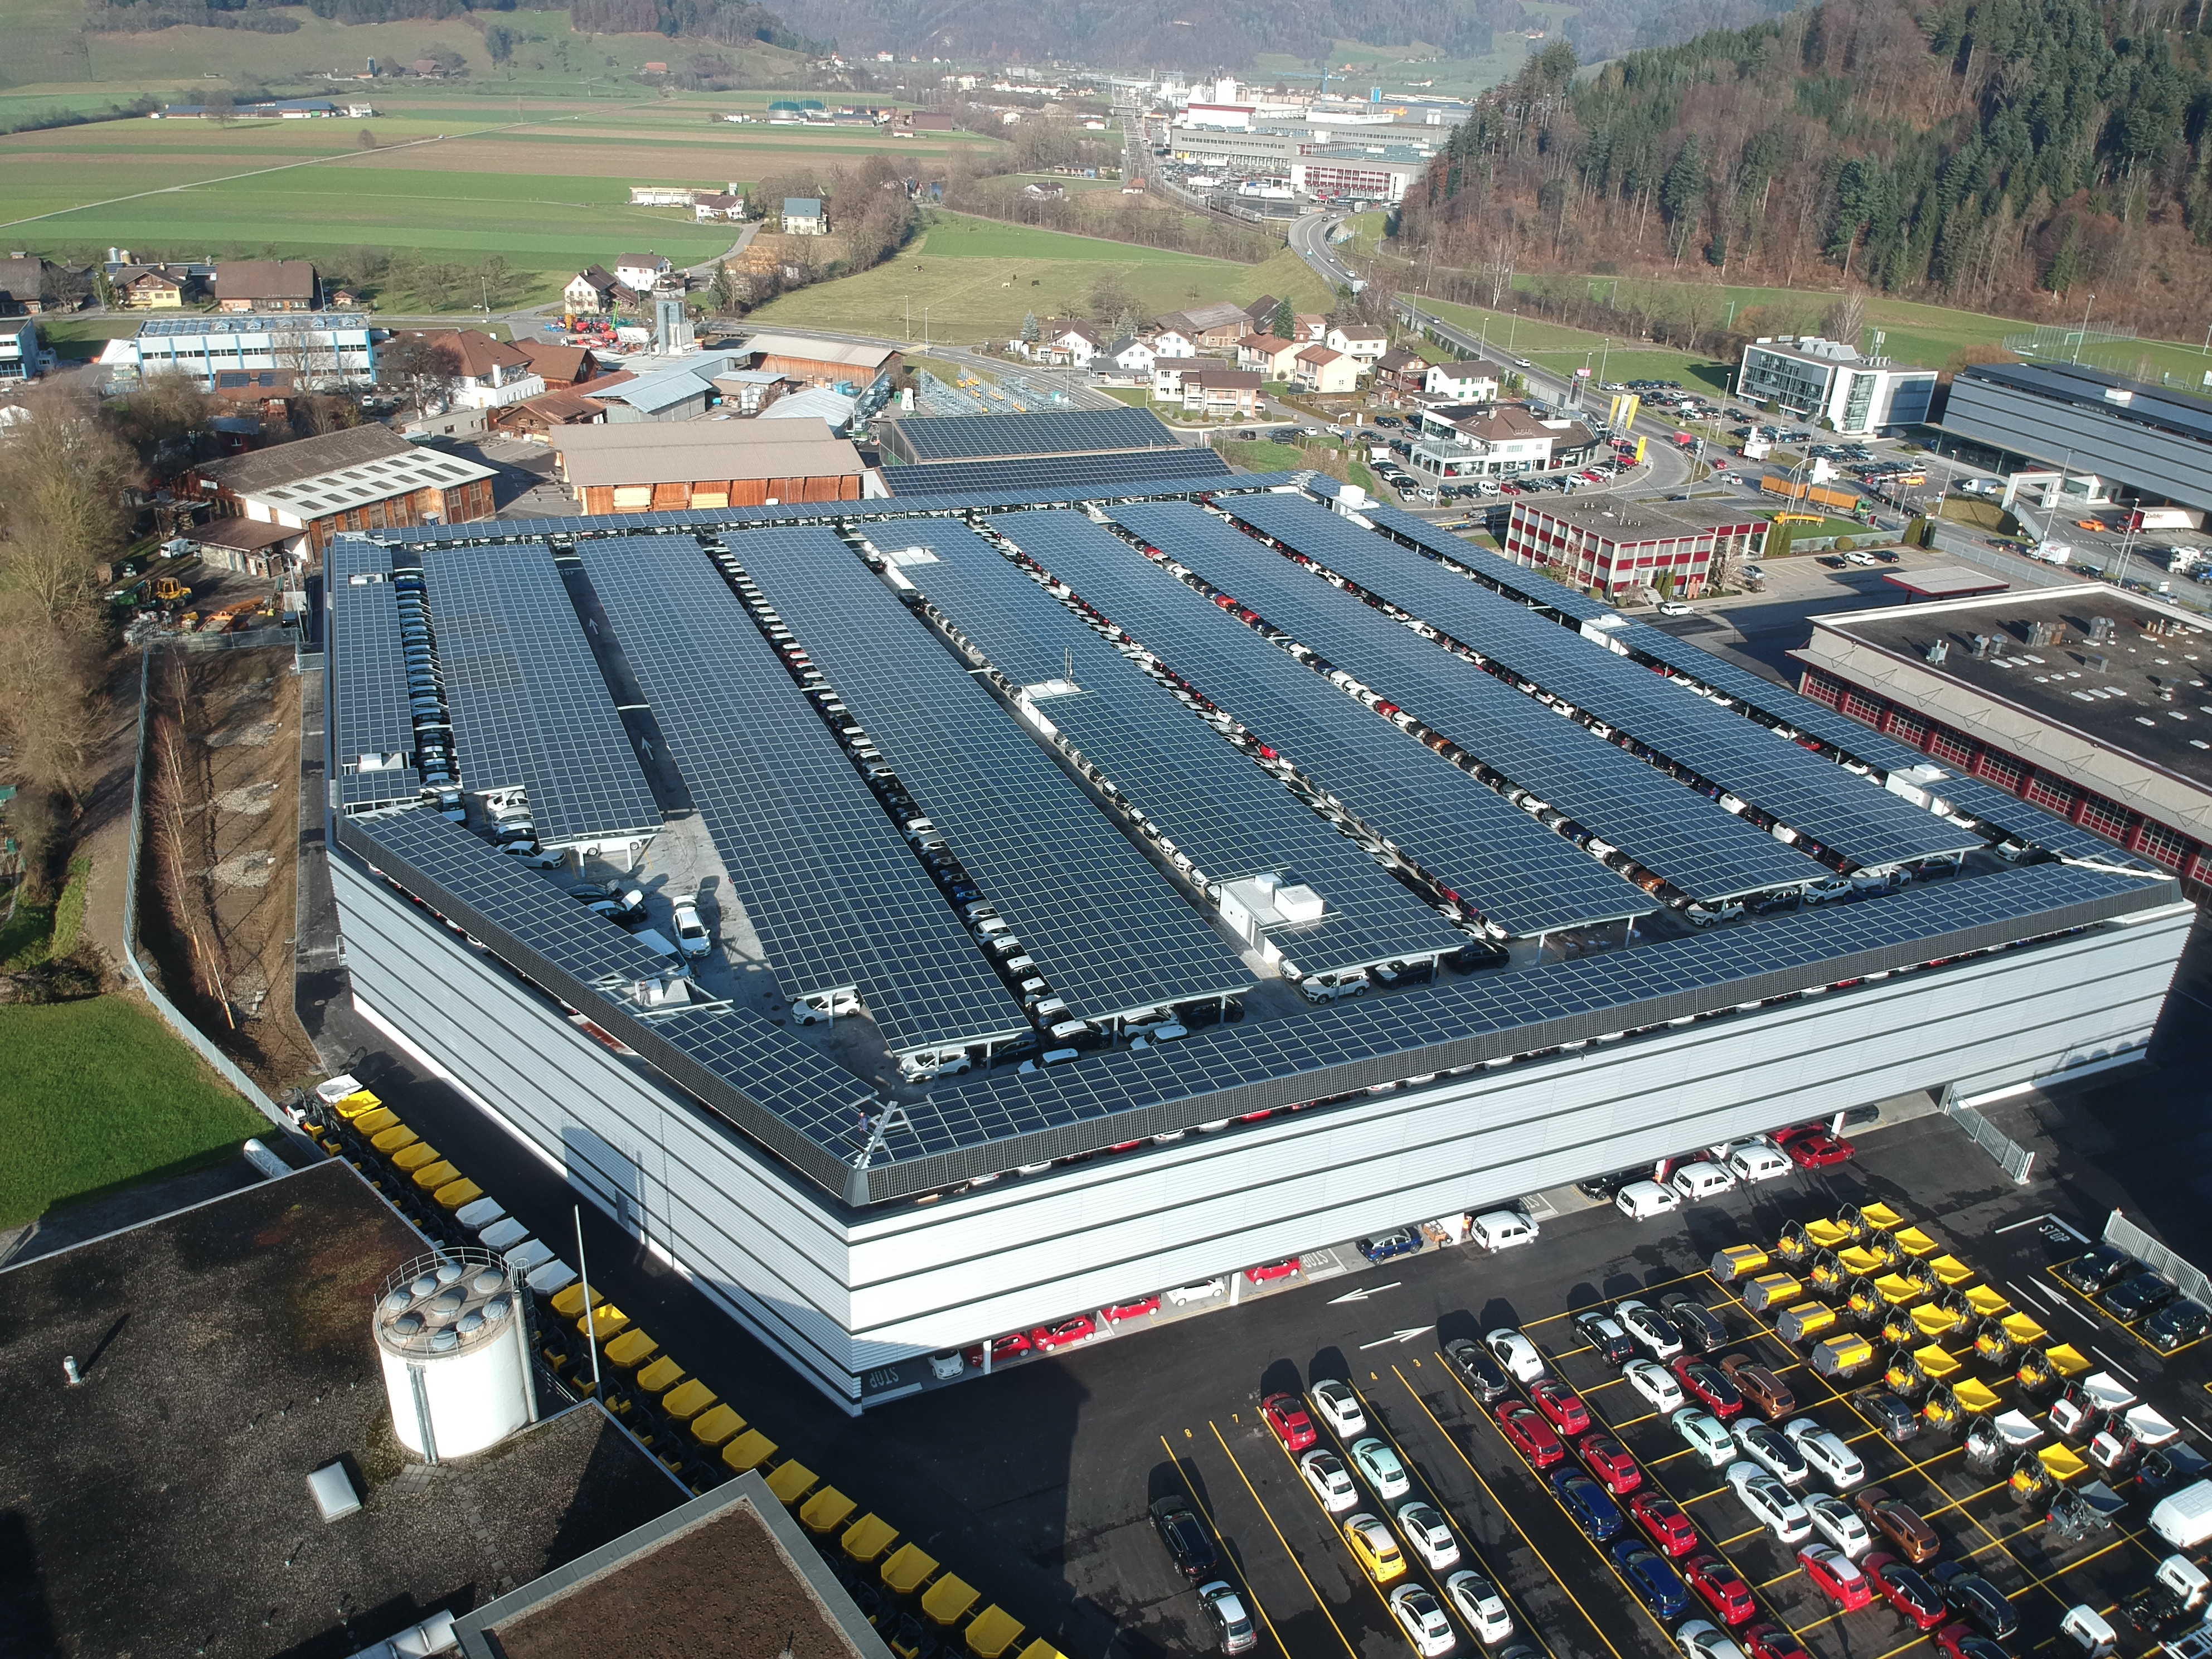 A PV canopy for a parking space at Galliker Transporte in Altishofen